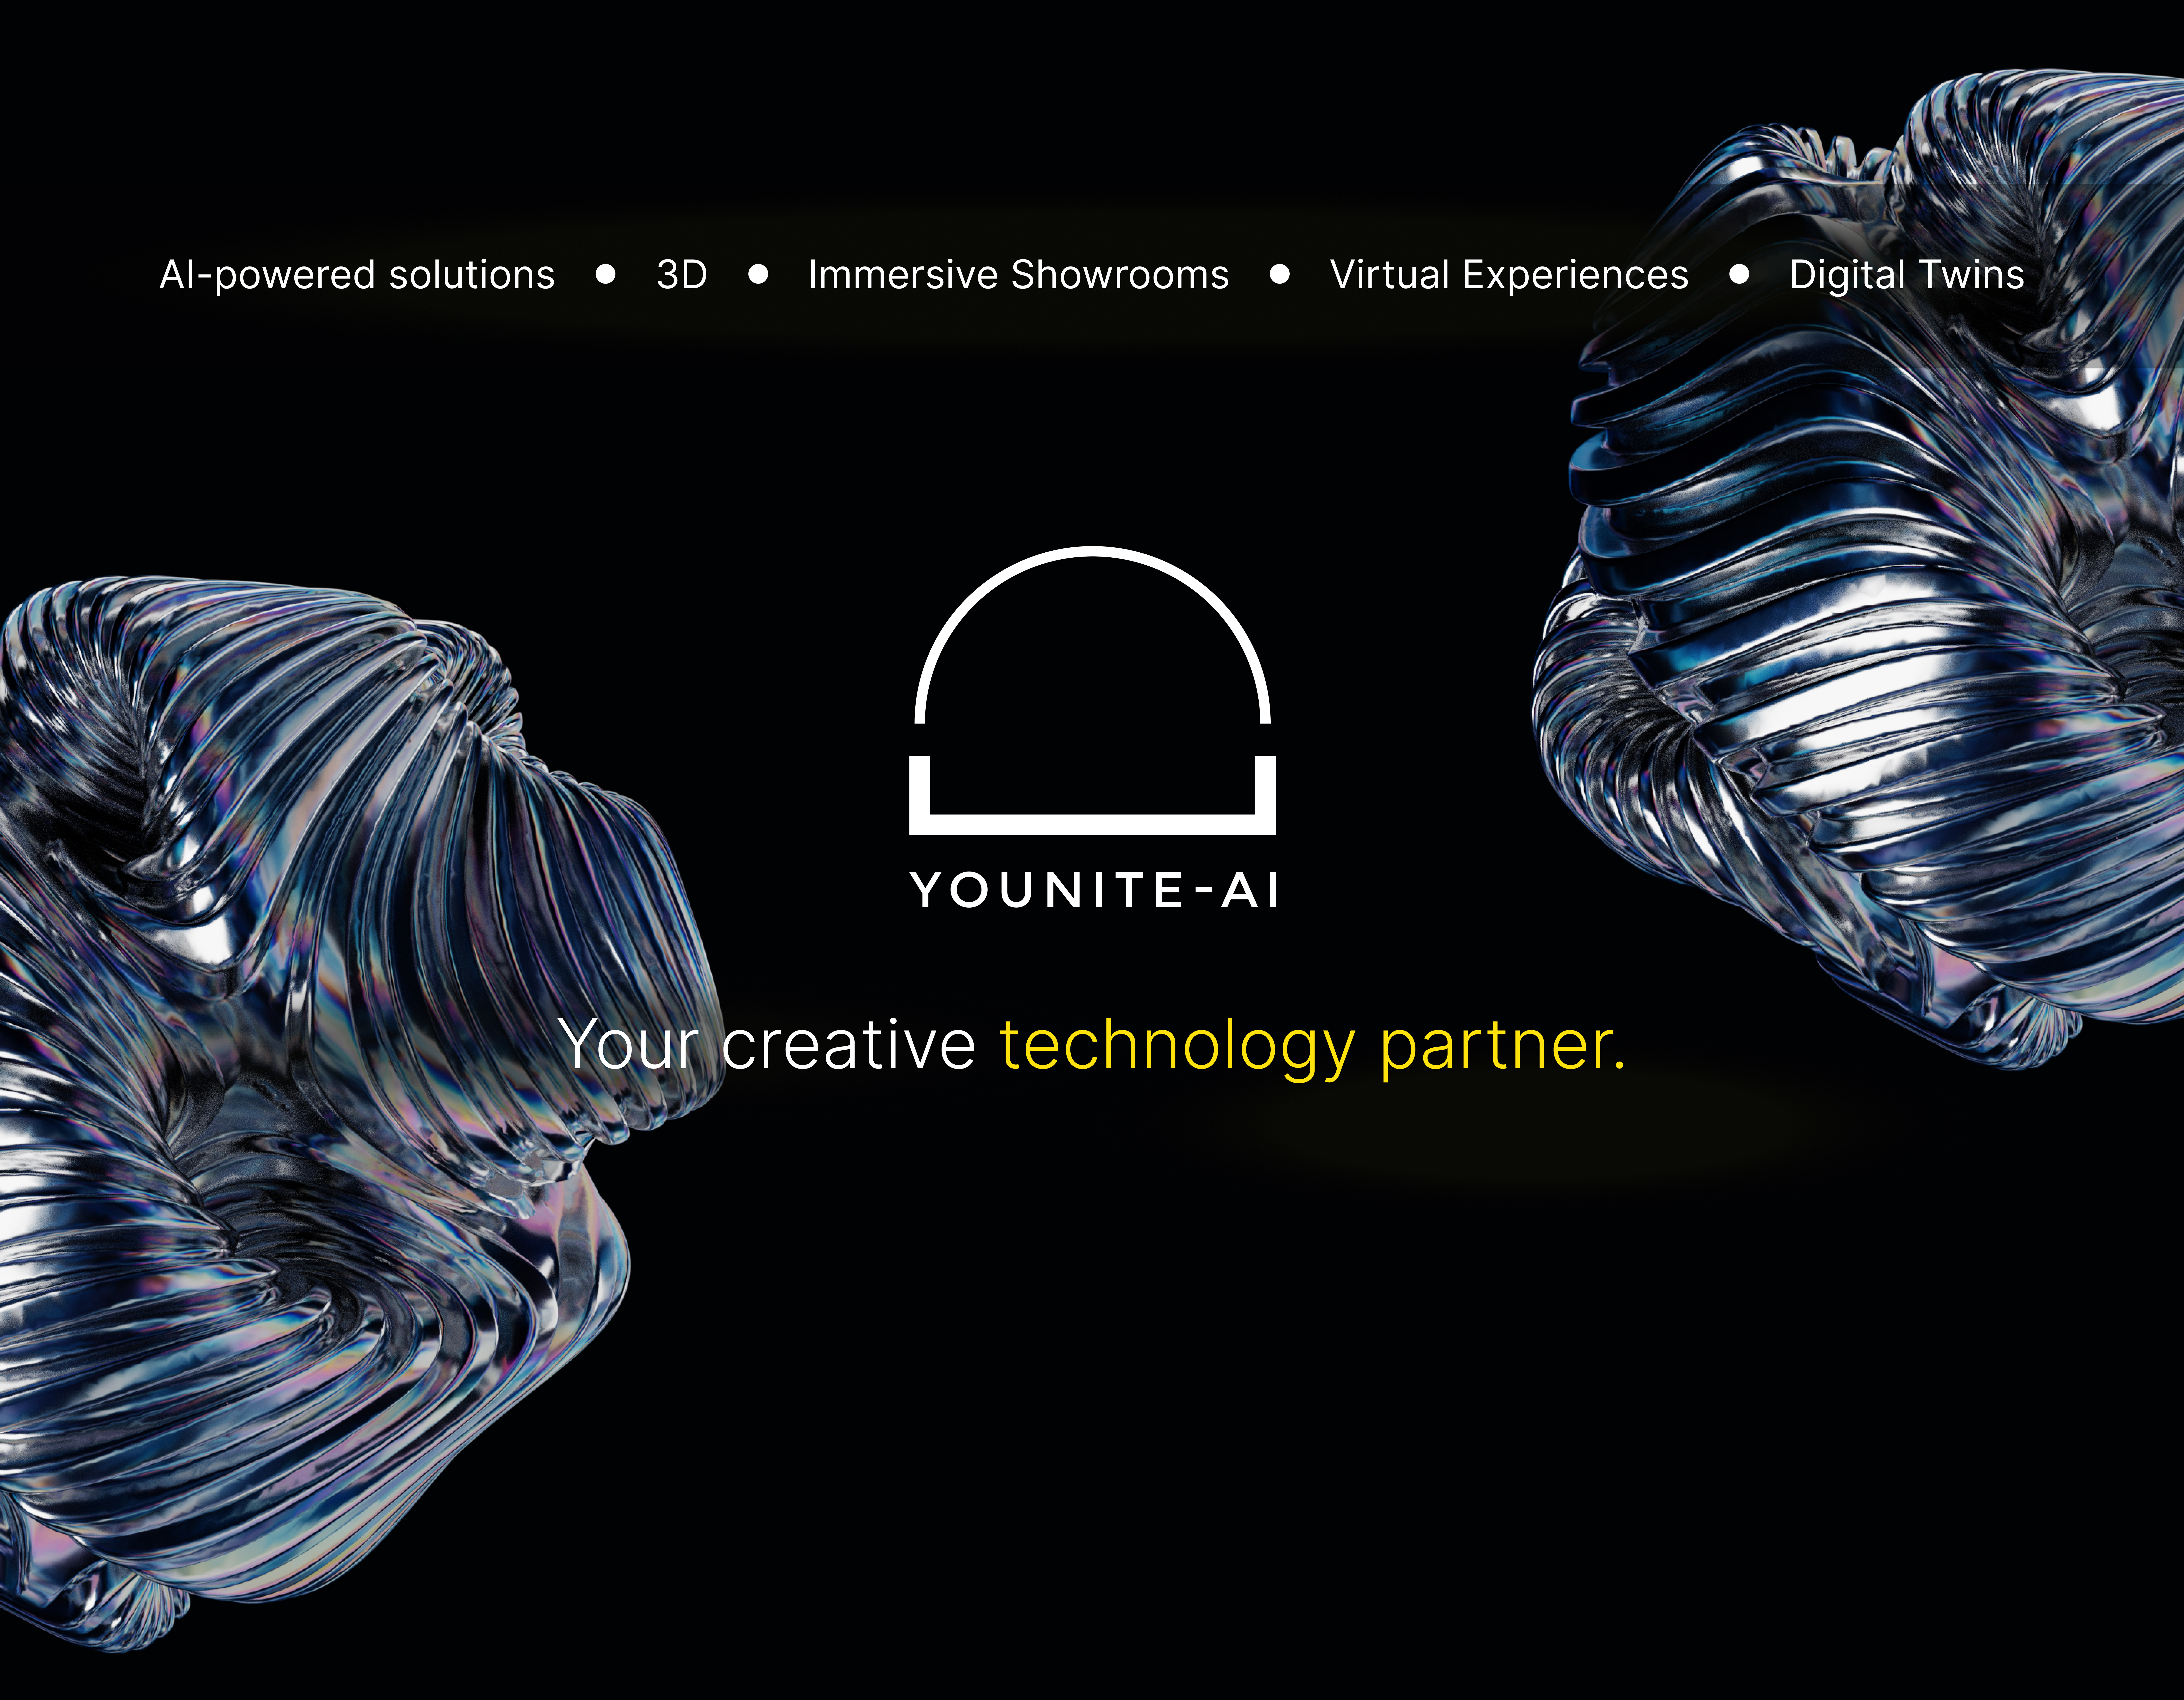 Your creative technology partner in AI and XR